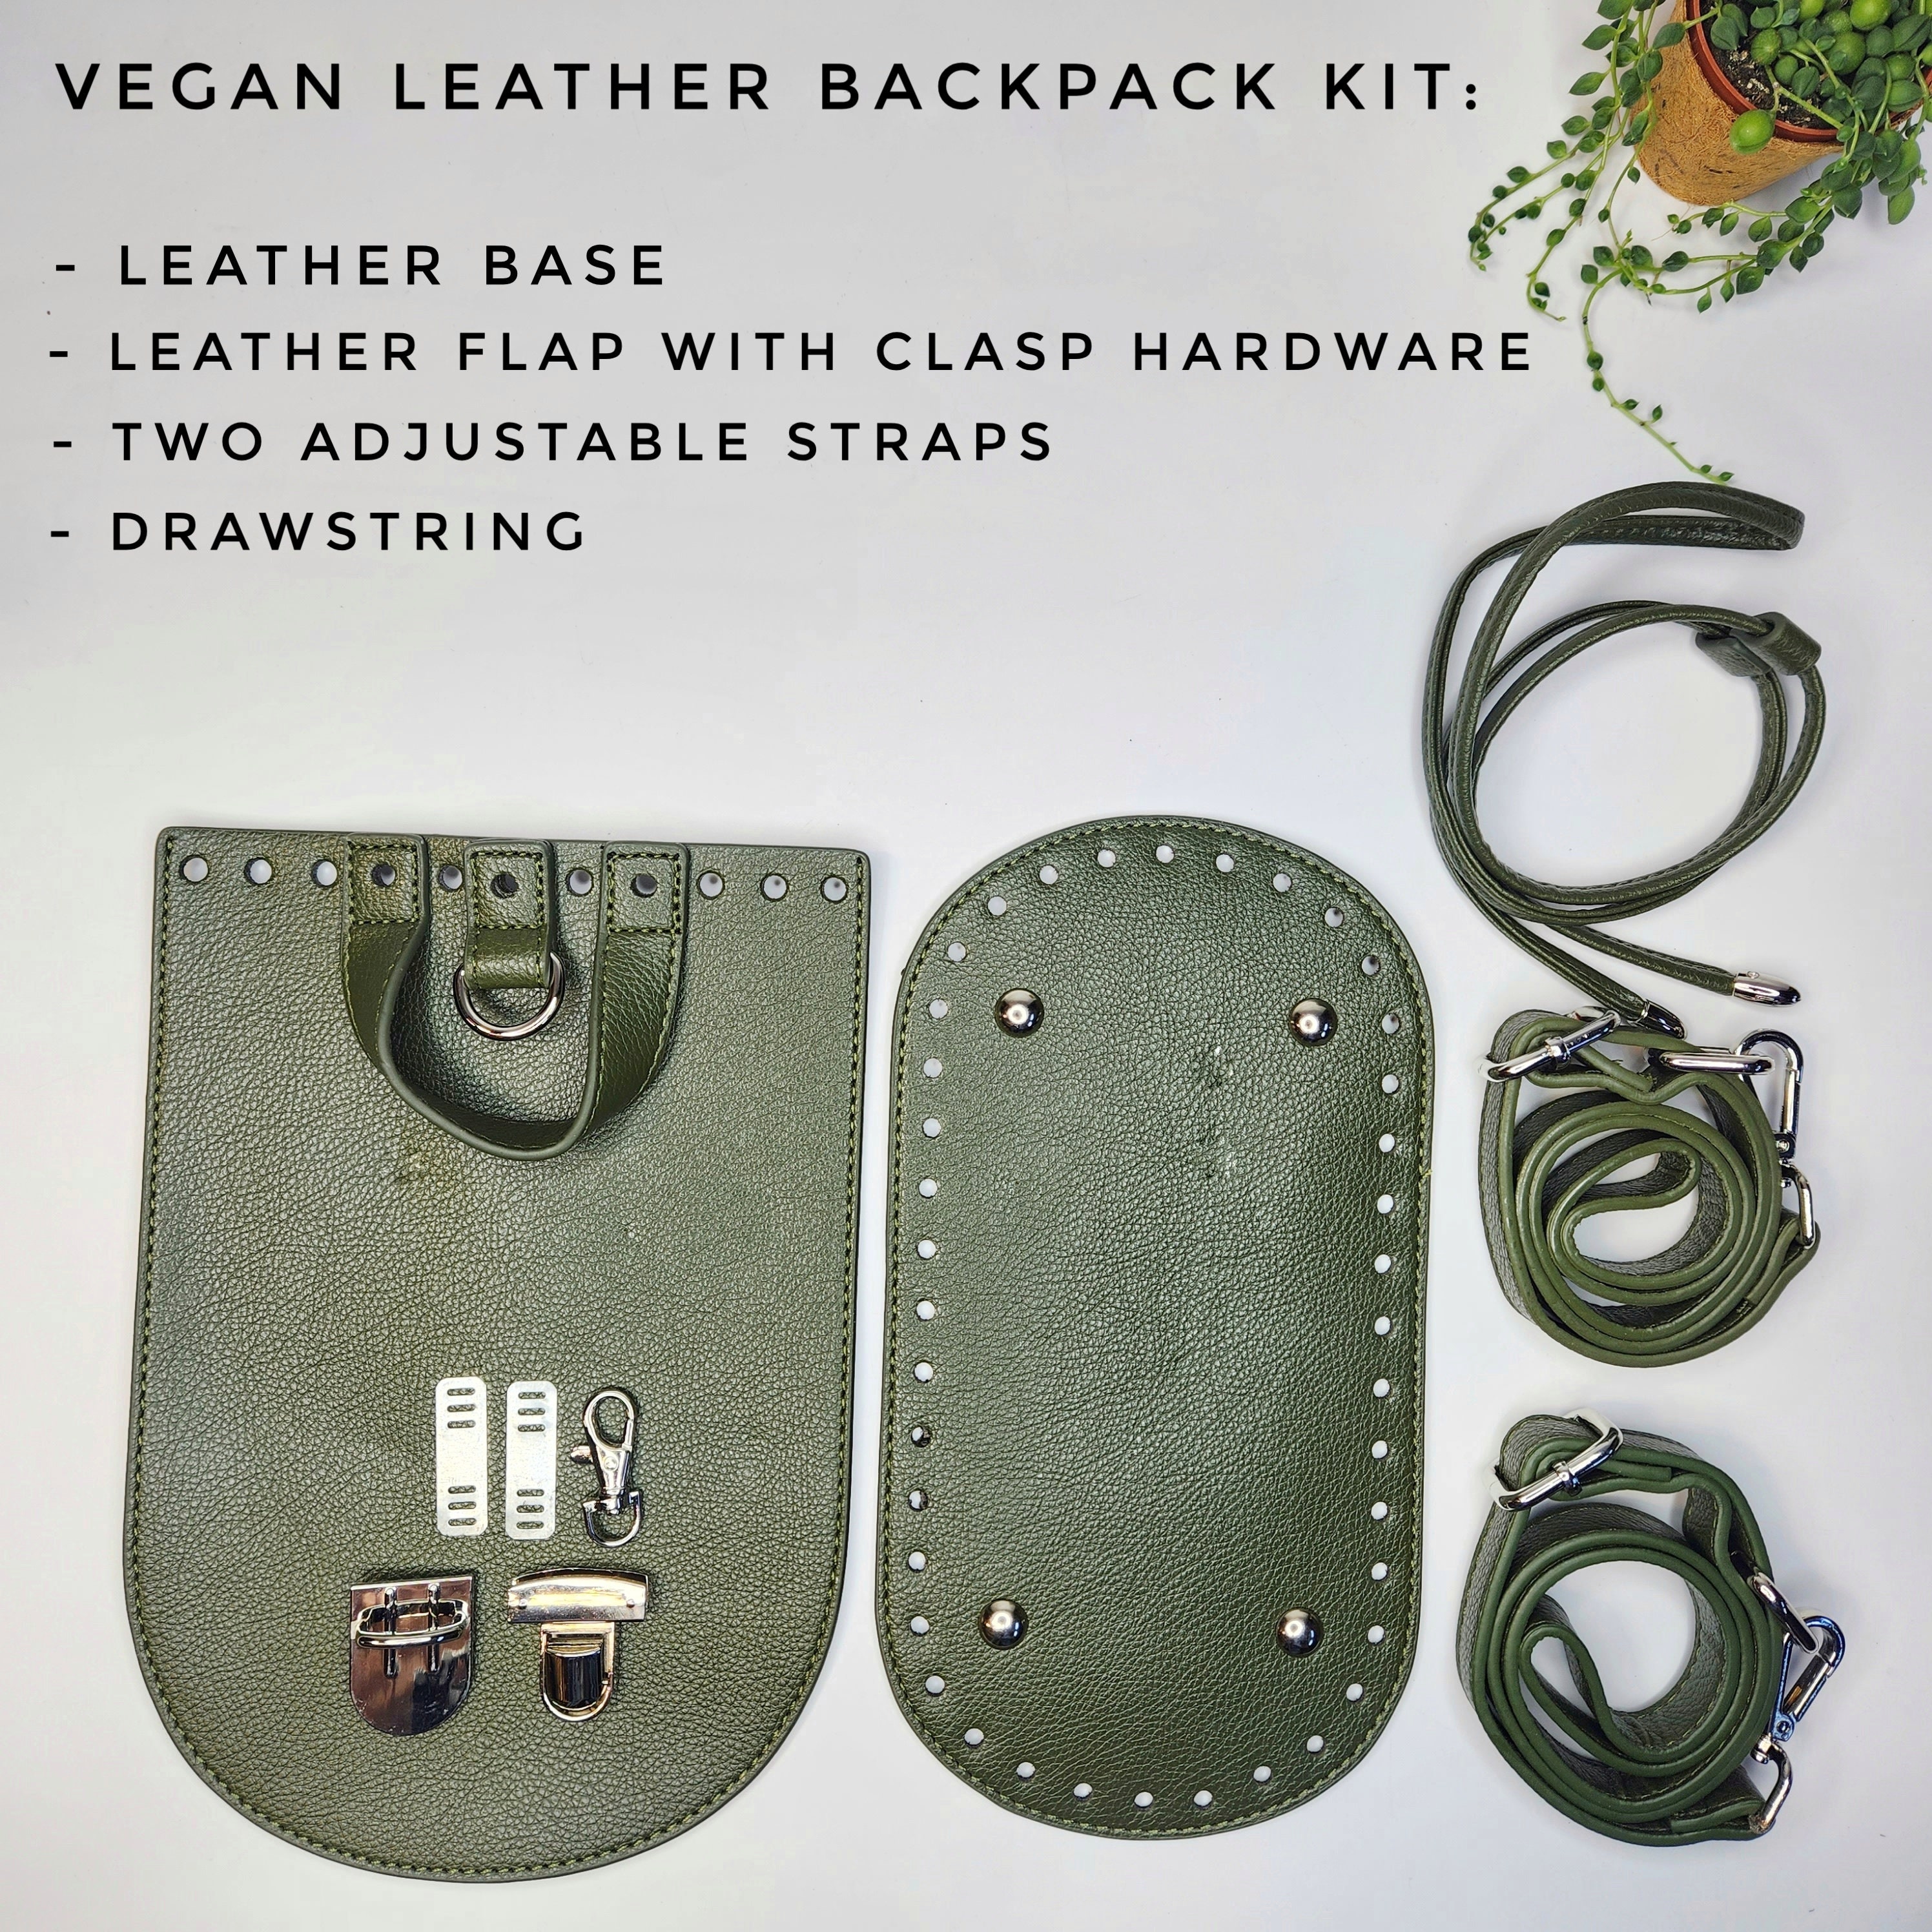 Kit for Knitting Backpack Cording Cord Yarn How to Knit a Backpack DIY  CROCHET BACKPACK Items for a Backpack Eco Leather Vegan Leather 